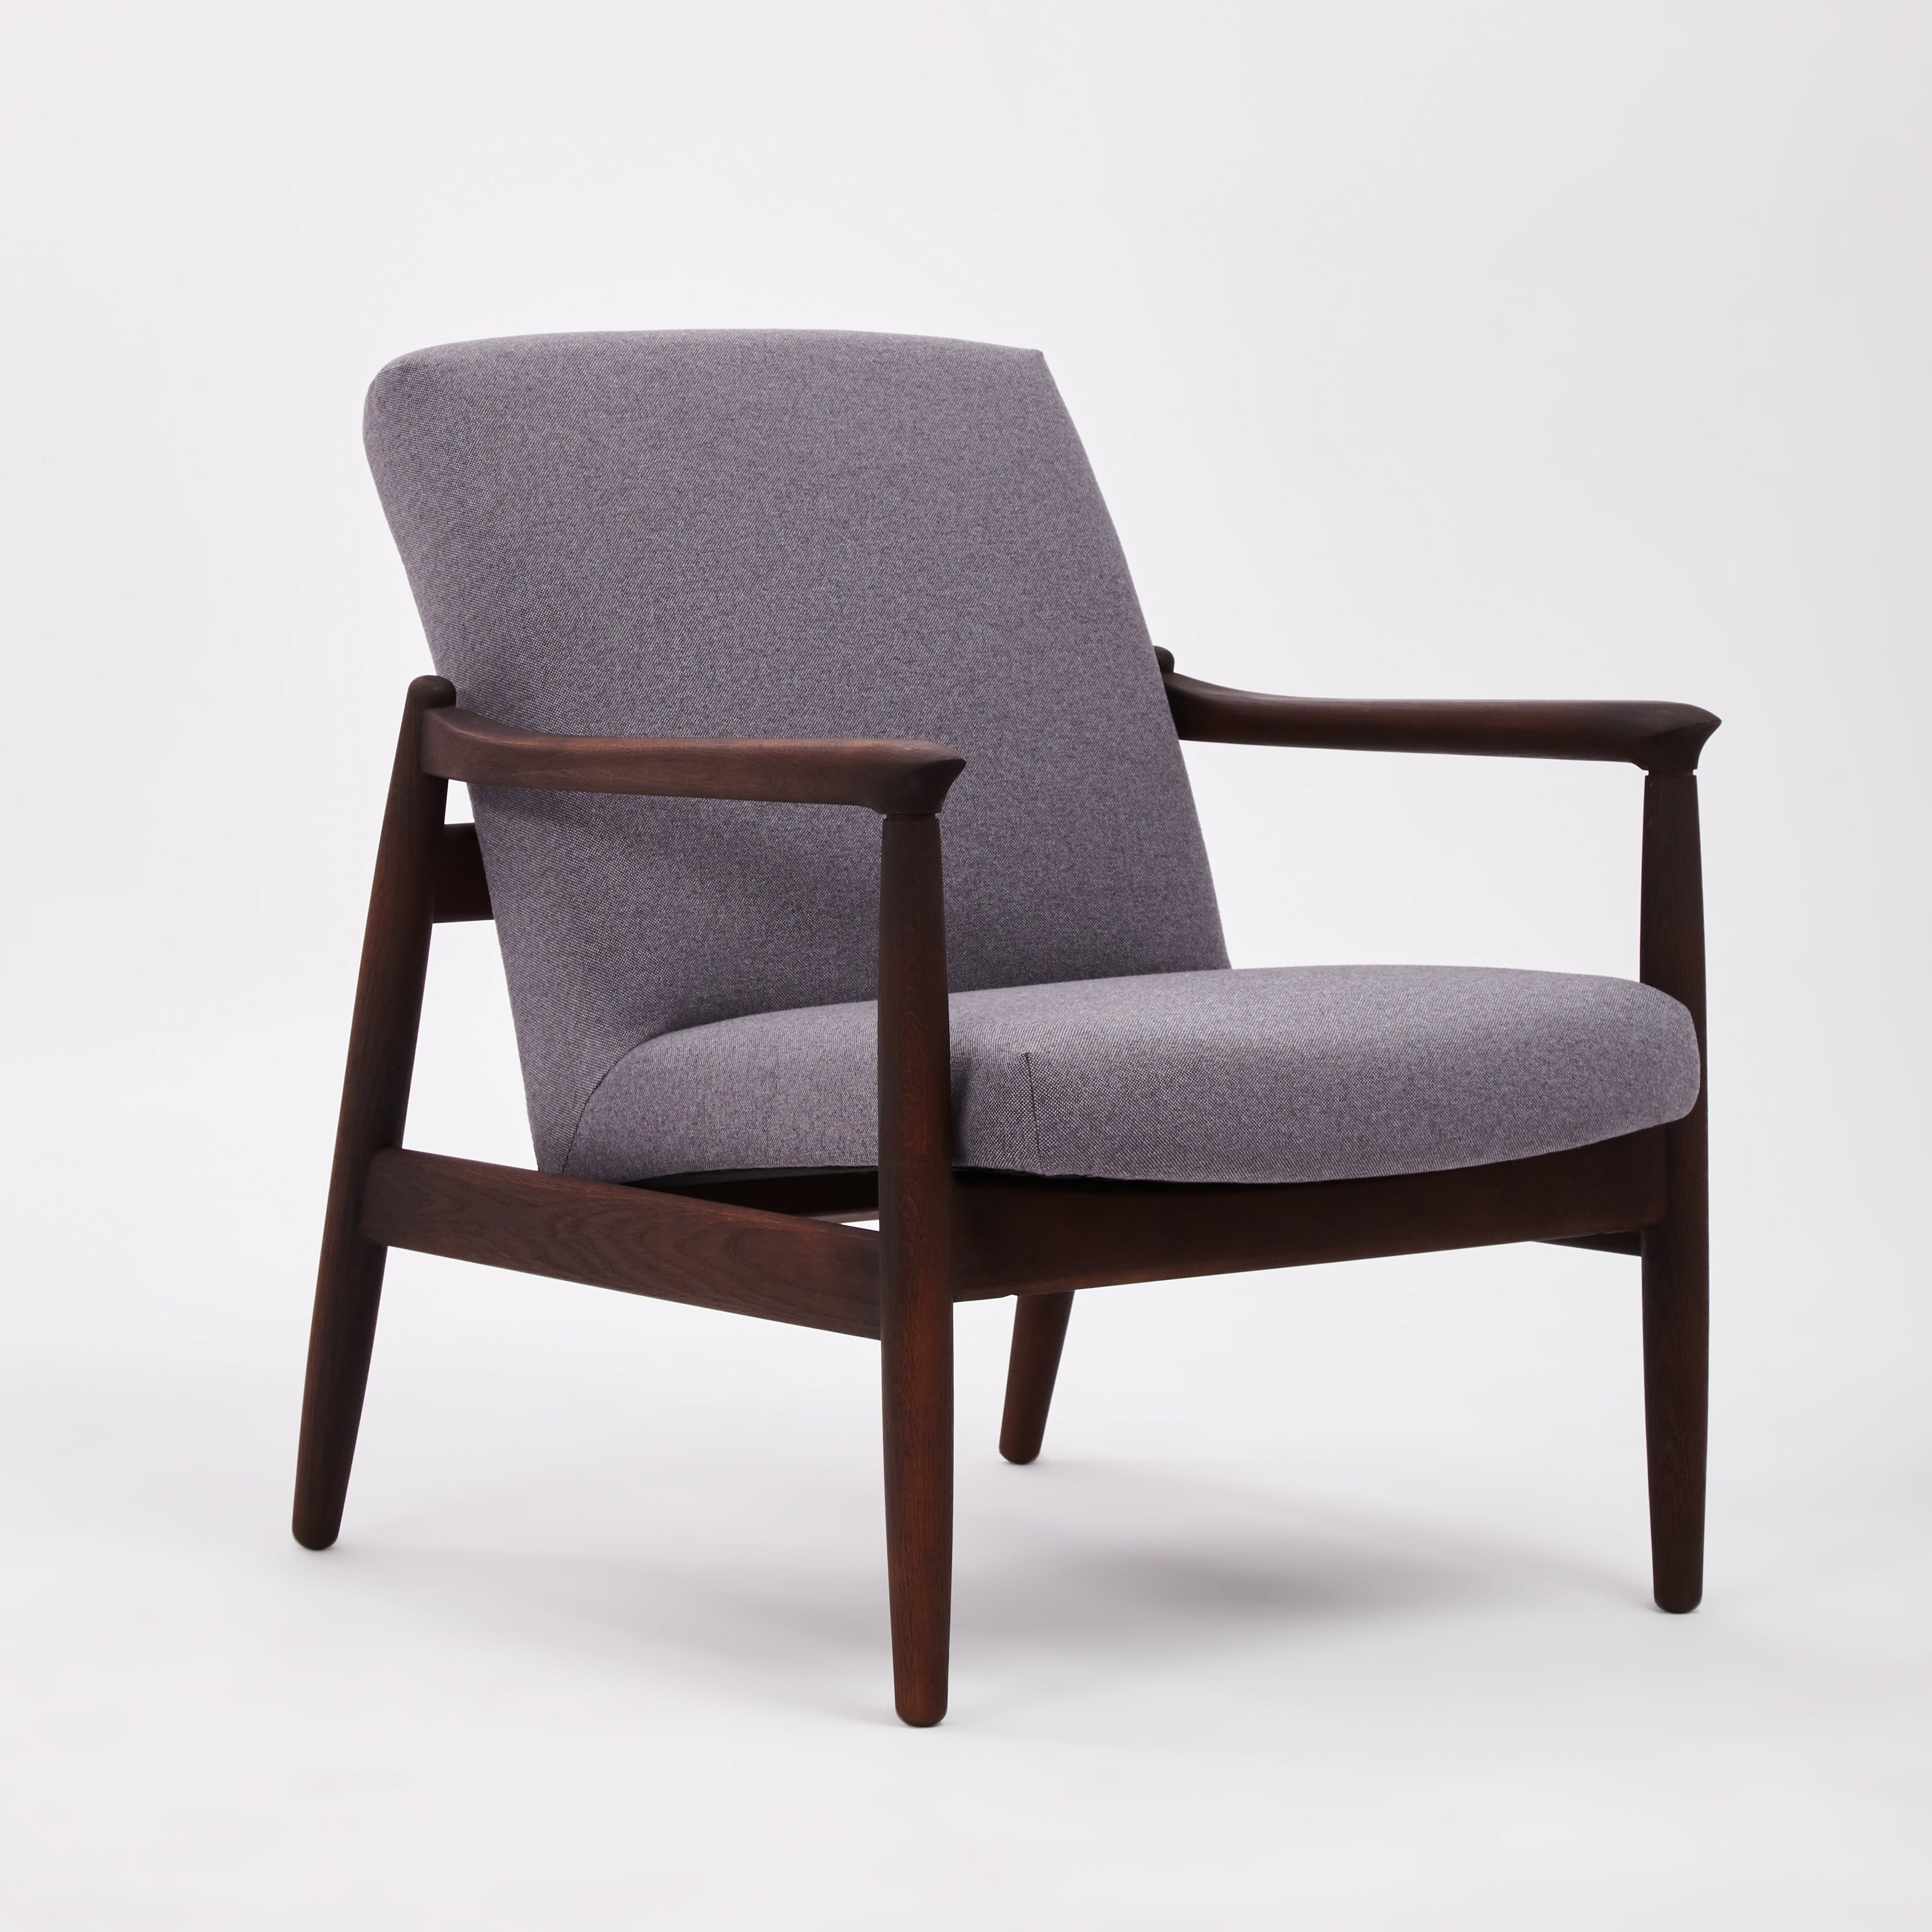 H 64 Lowback Chair  oak frame upholstery colour  grey